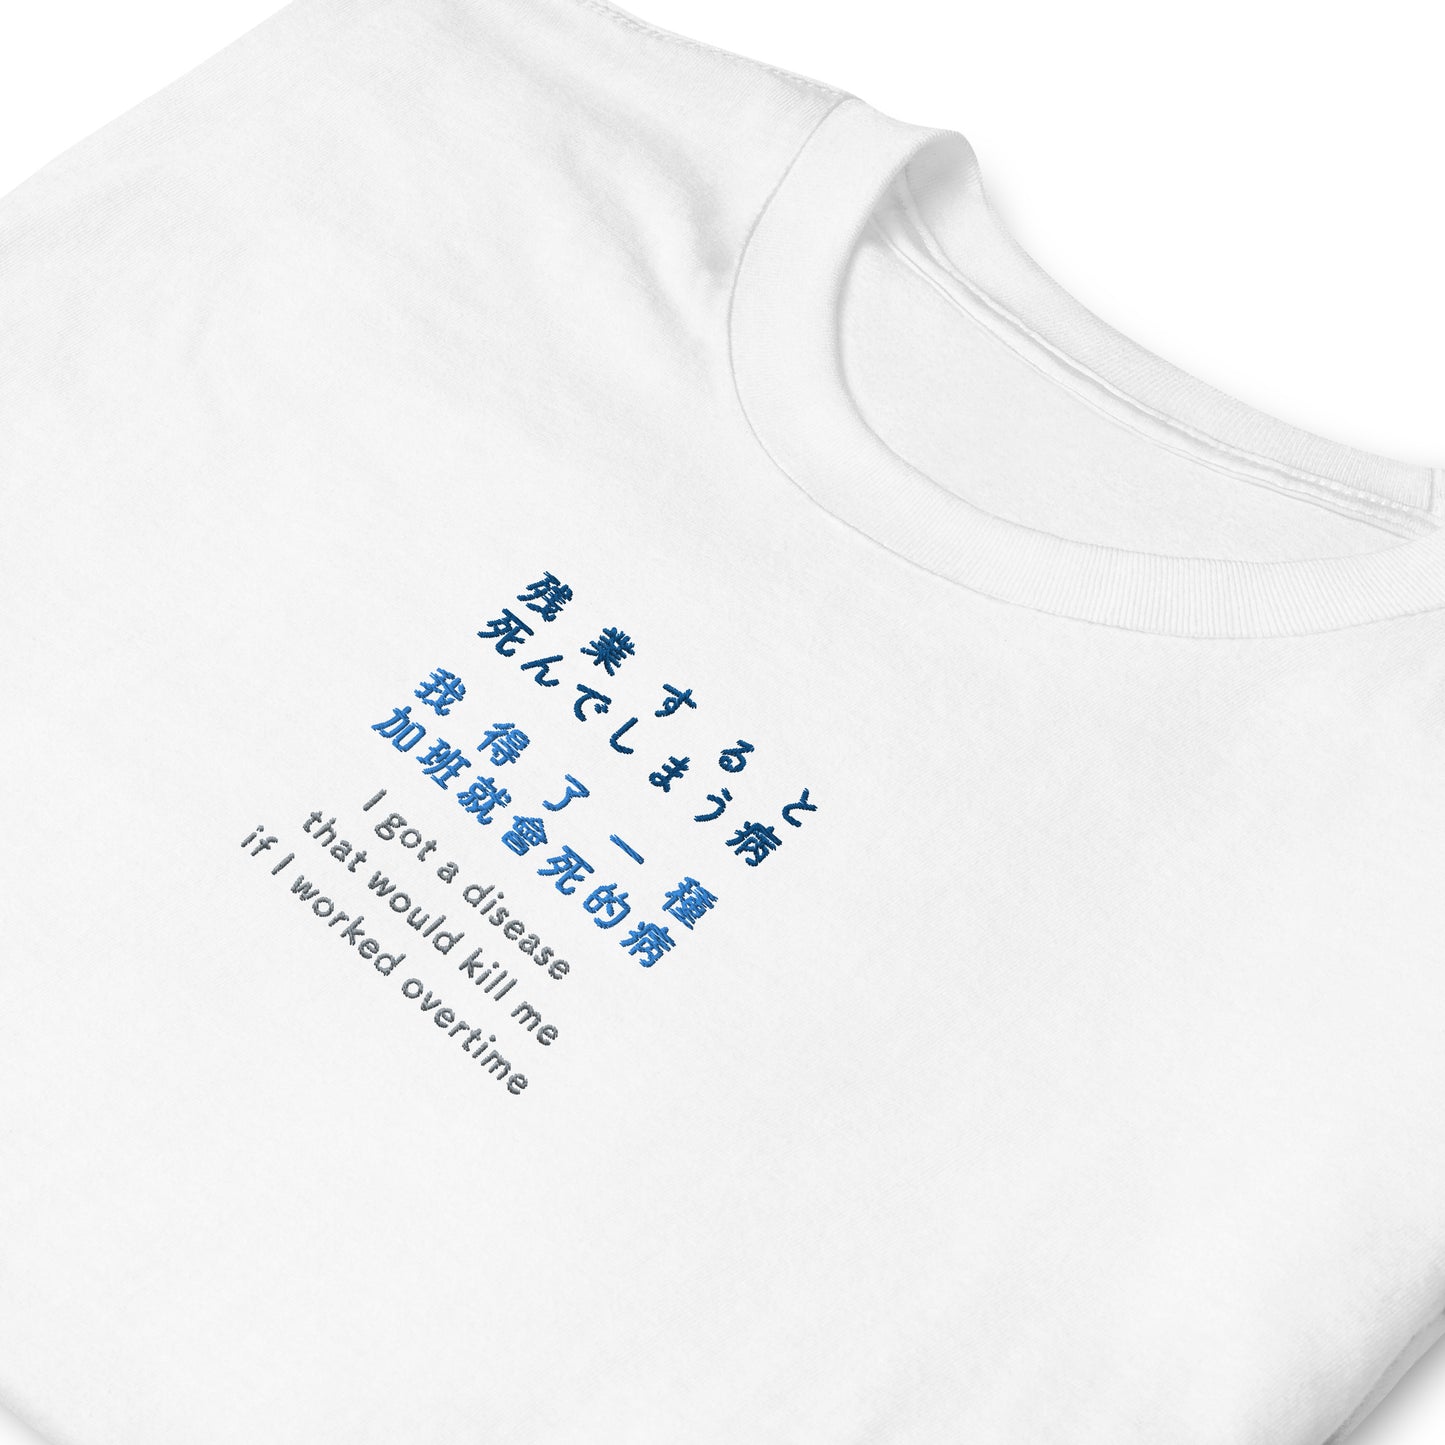 White High Quality Tee - Front Design with an Navy, Light Blue, Gray Embroidery "i got a disease that would kill me if i worked overtime" in Japanese,Chinese and English